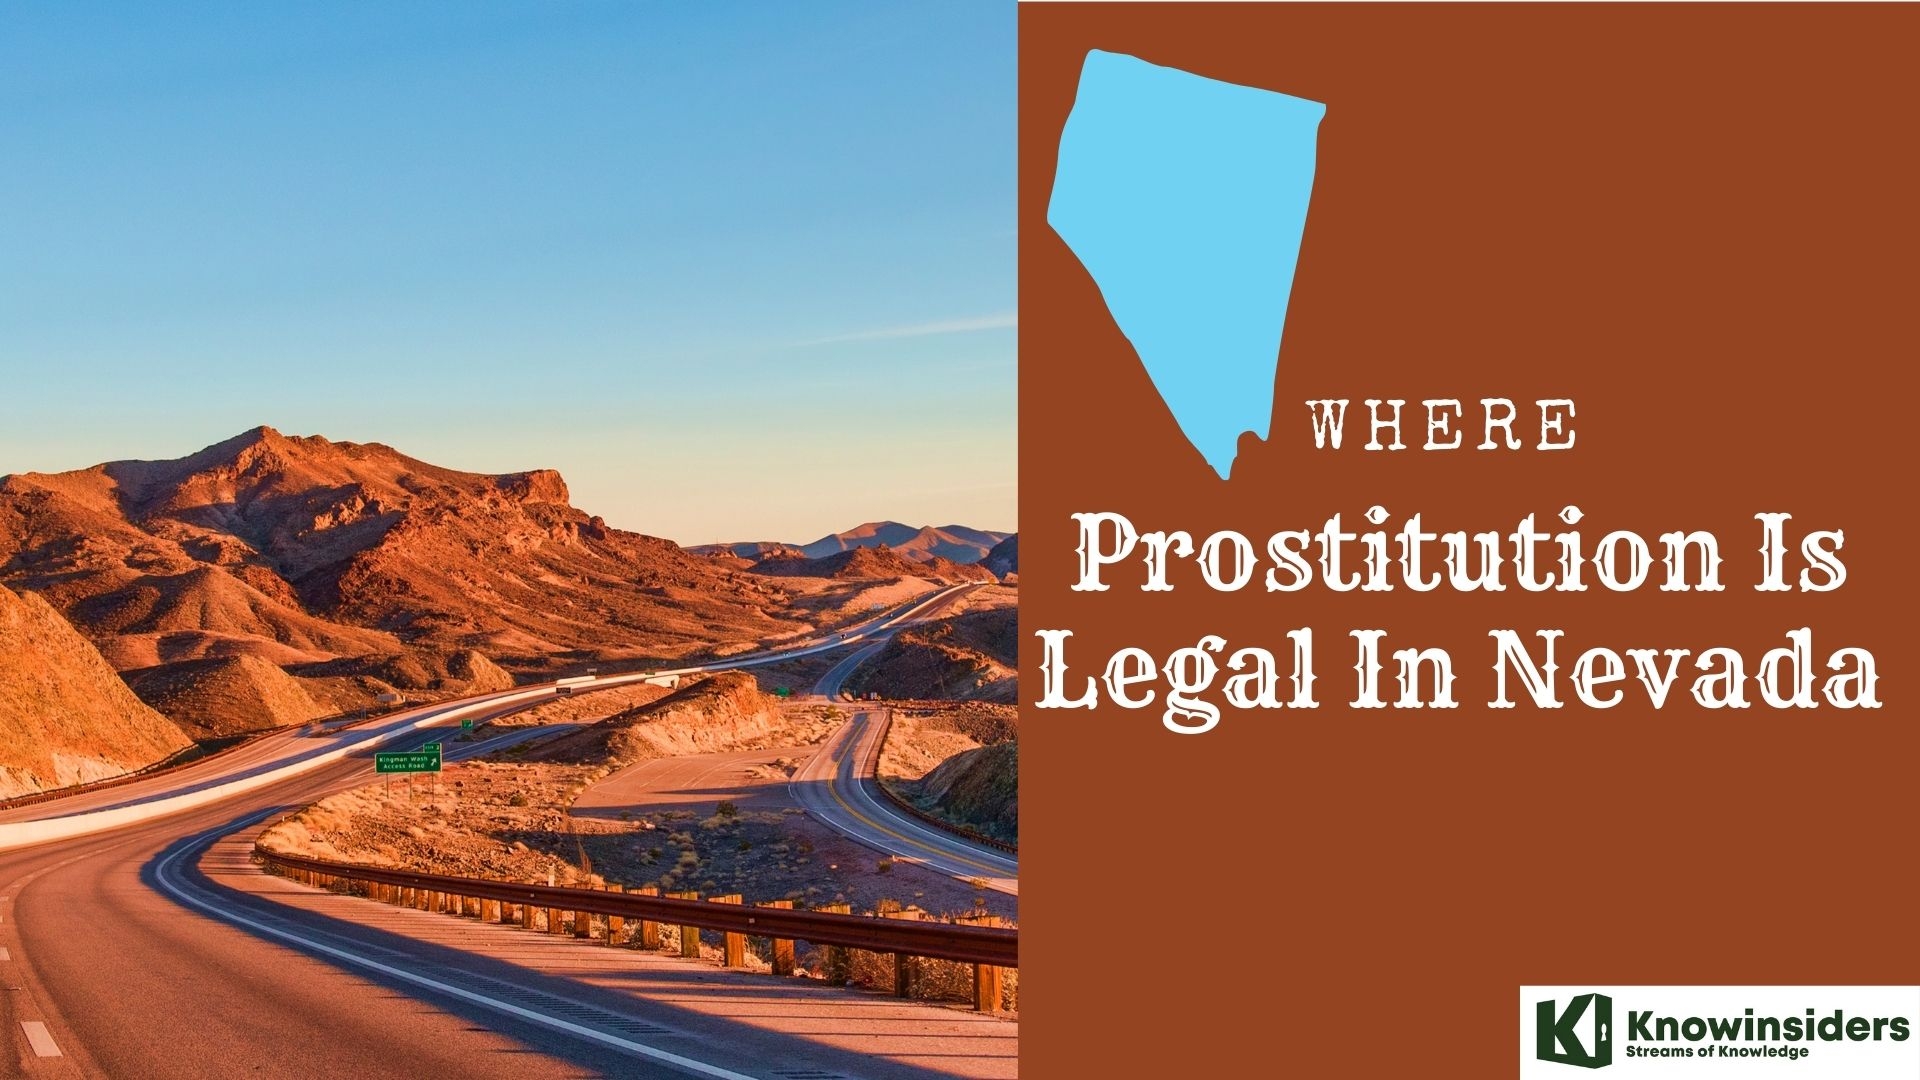 Where Prostitution Is Legal In Nevada